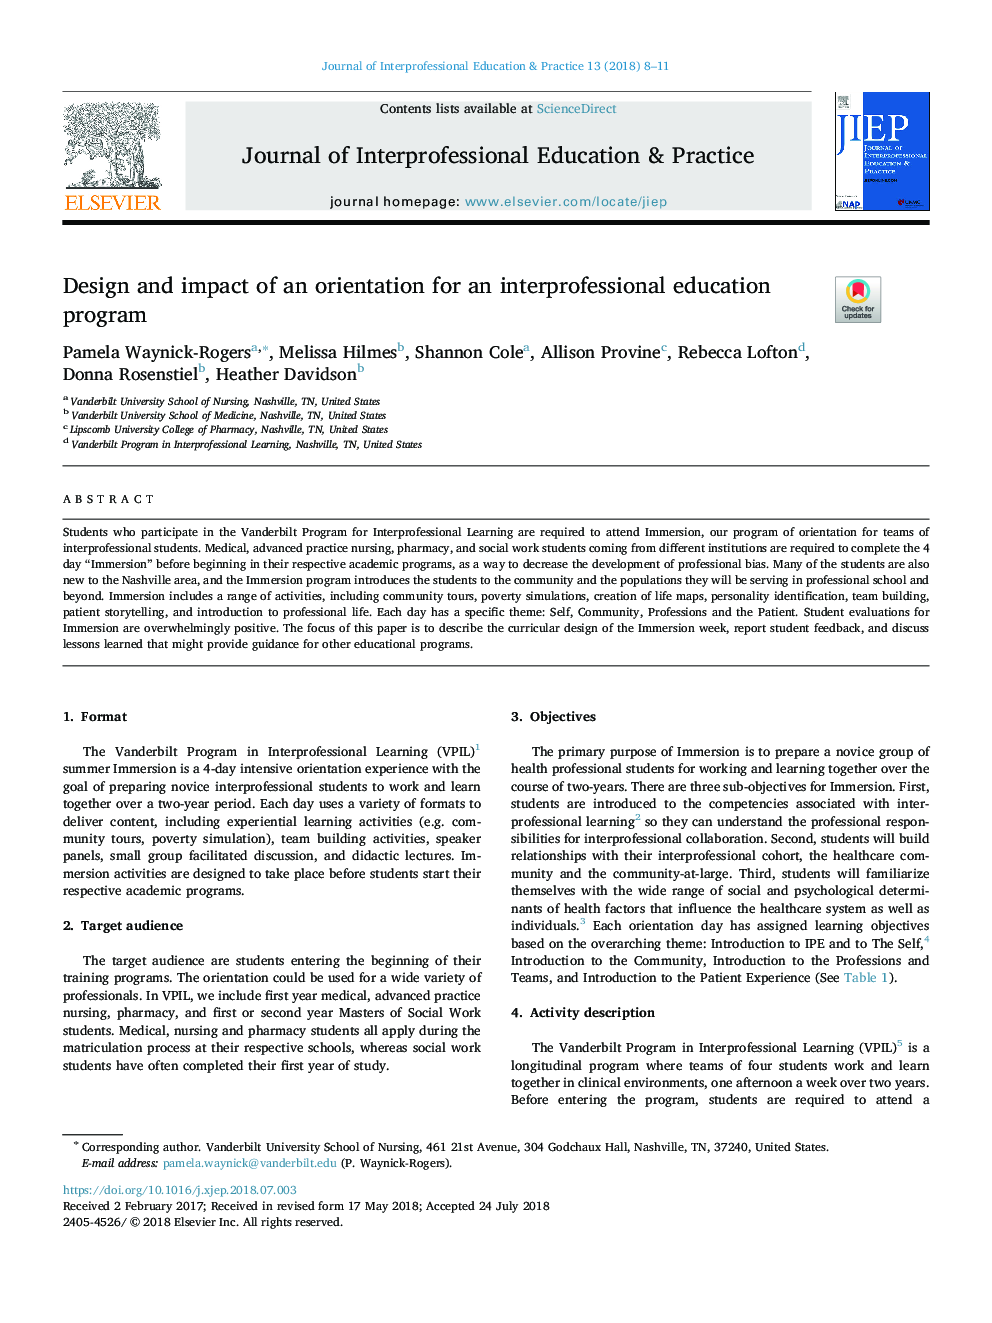 Design and impact of an orientation for an interprofessional education program